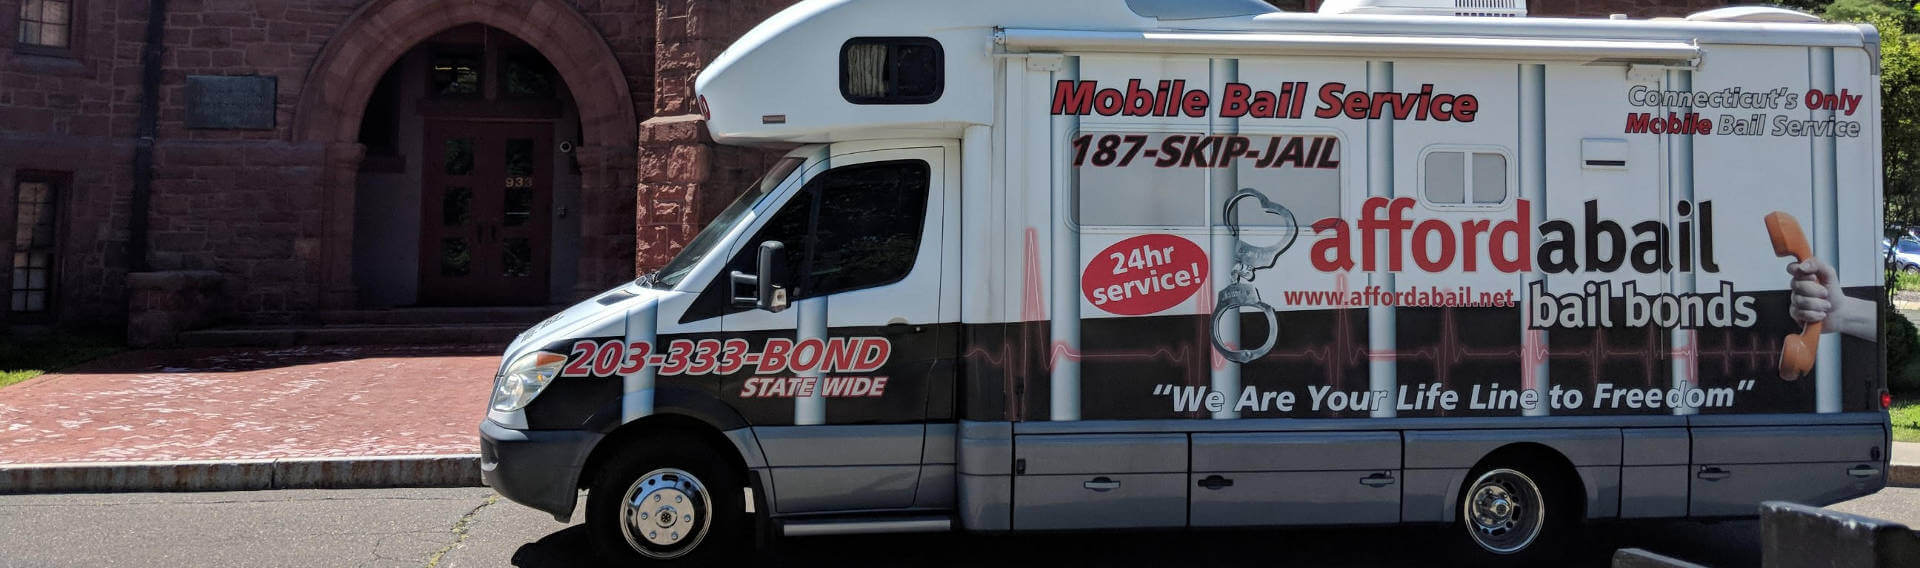 Mobile bail bonds service in West Haven CT